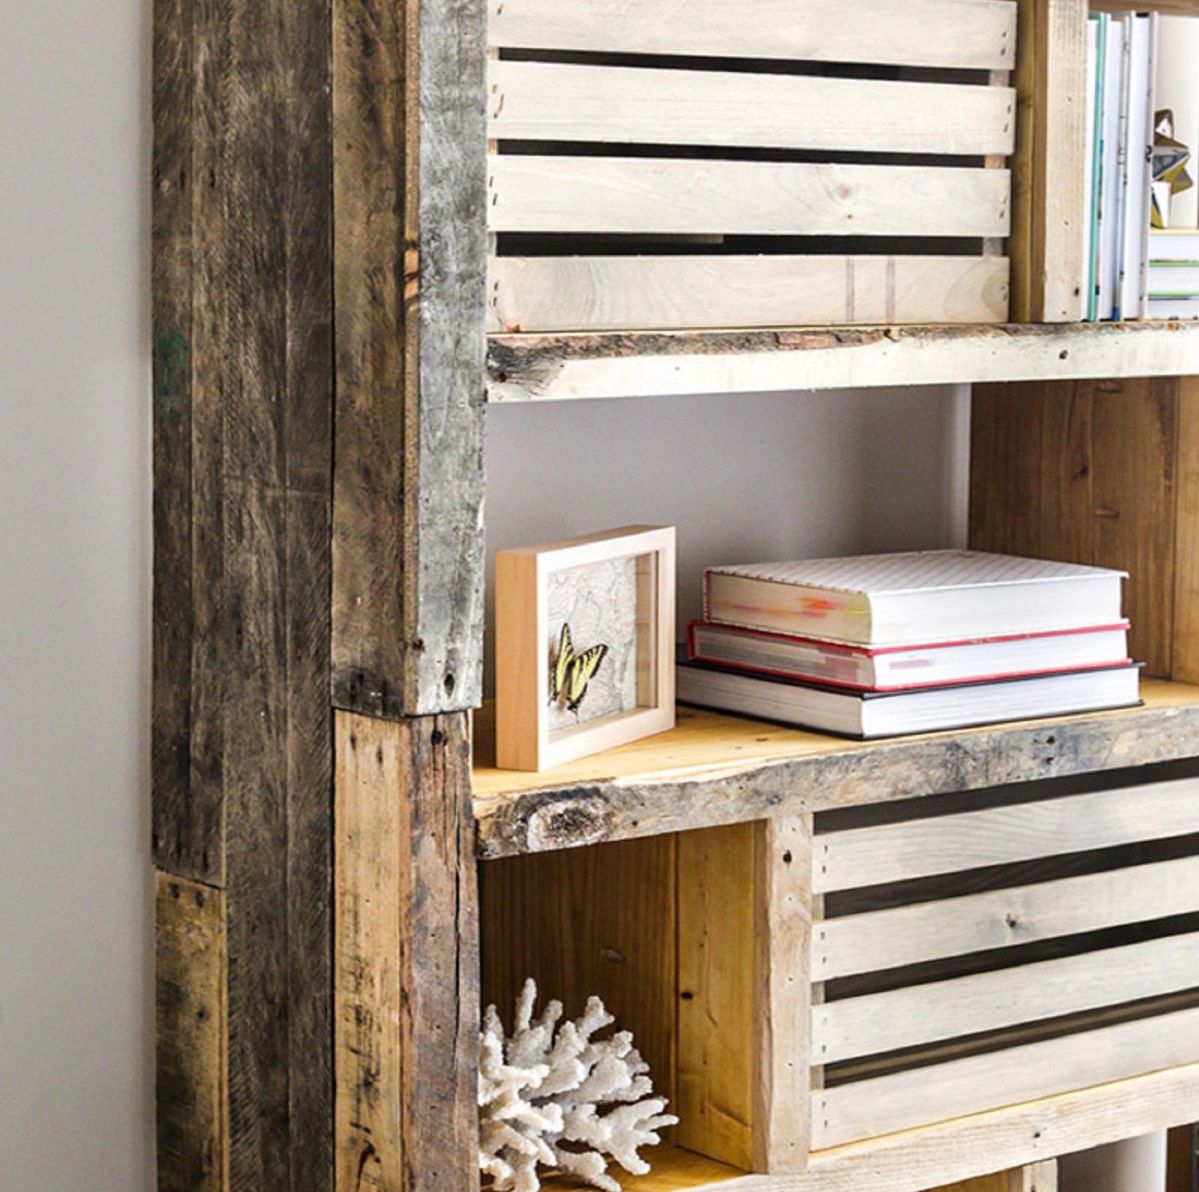  Fantastic things to make from wooden pallets 